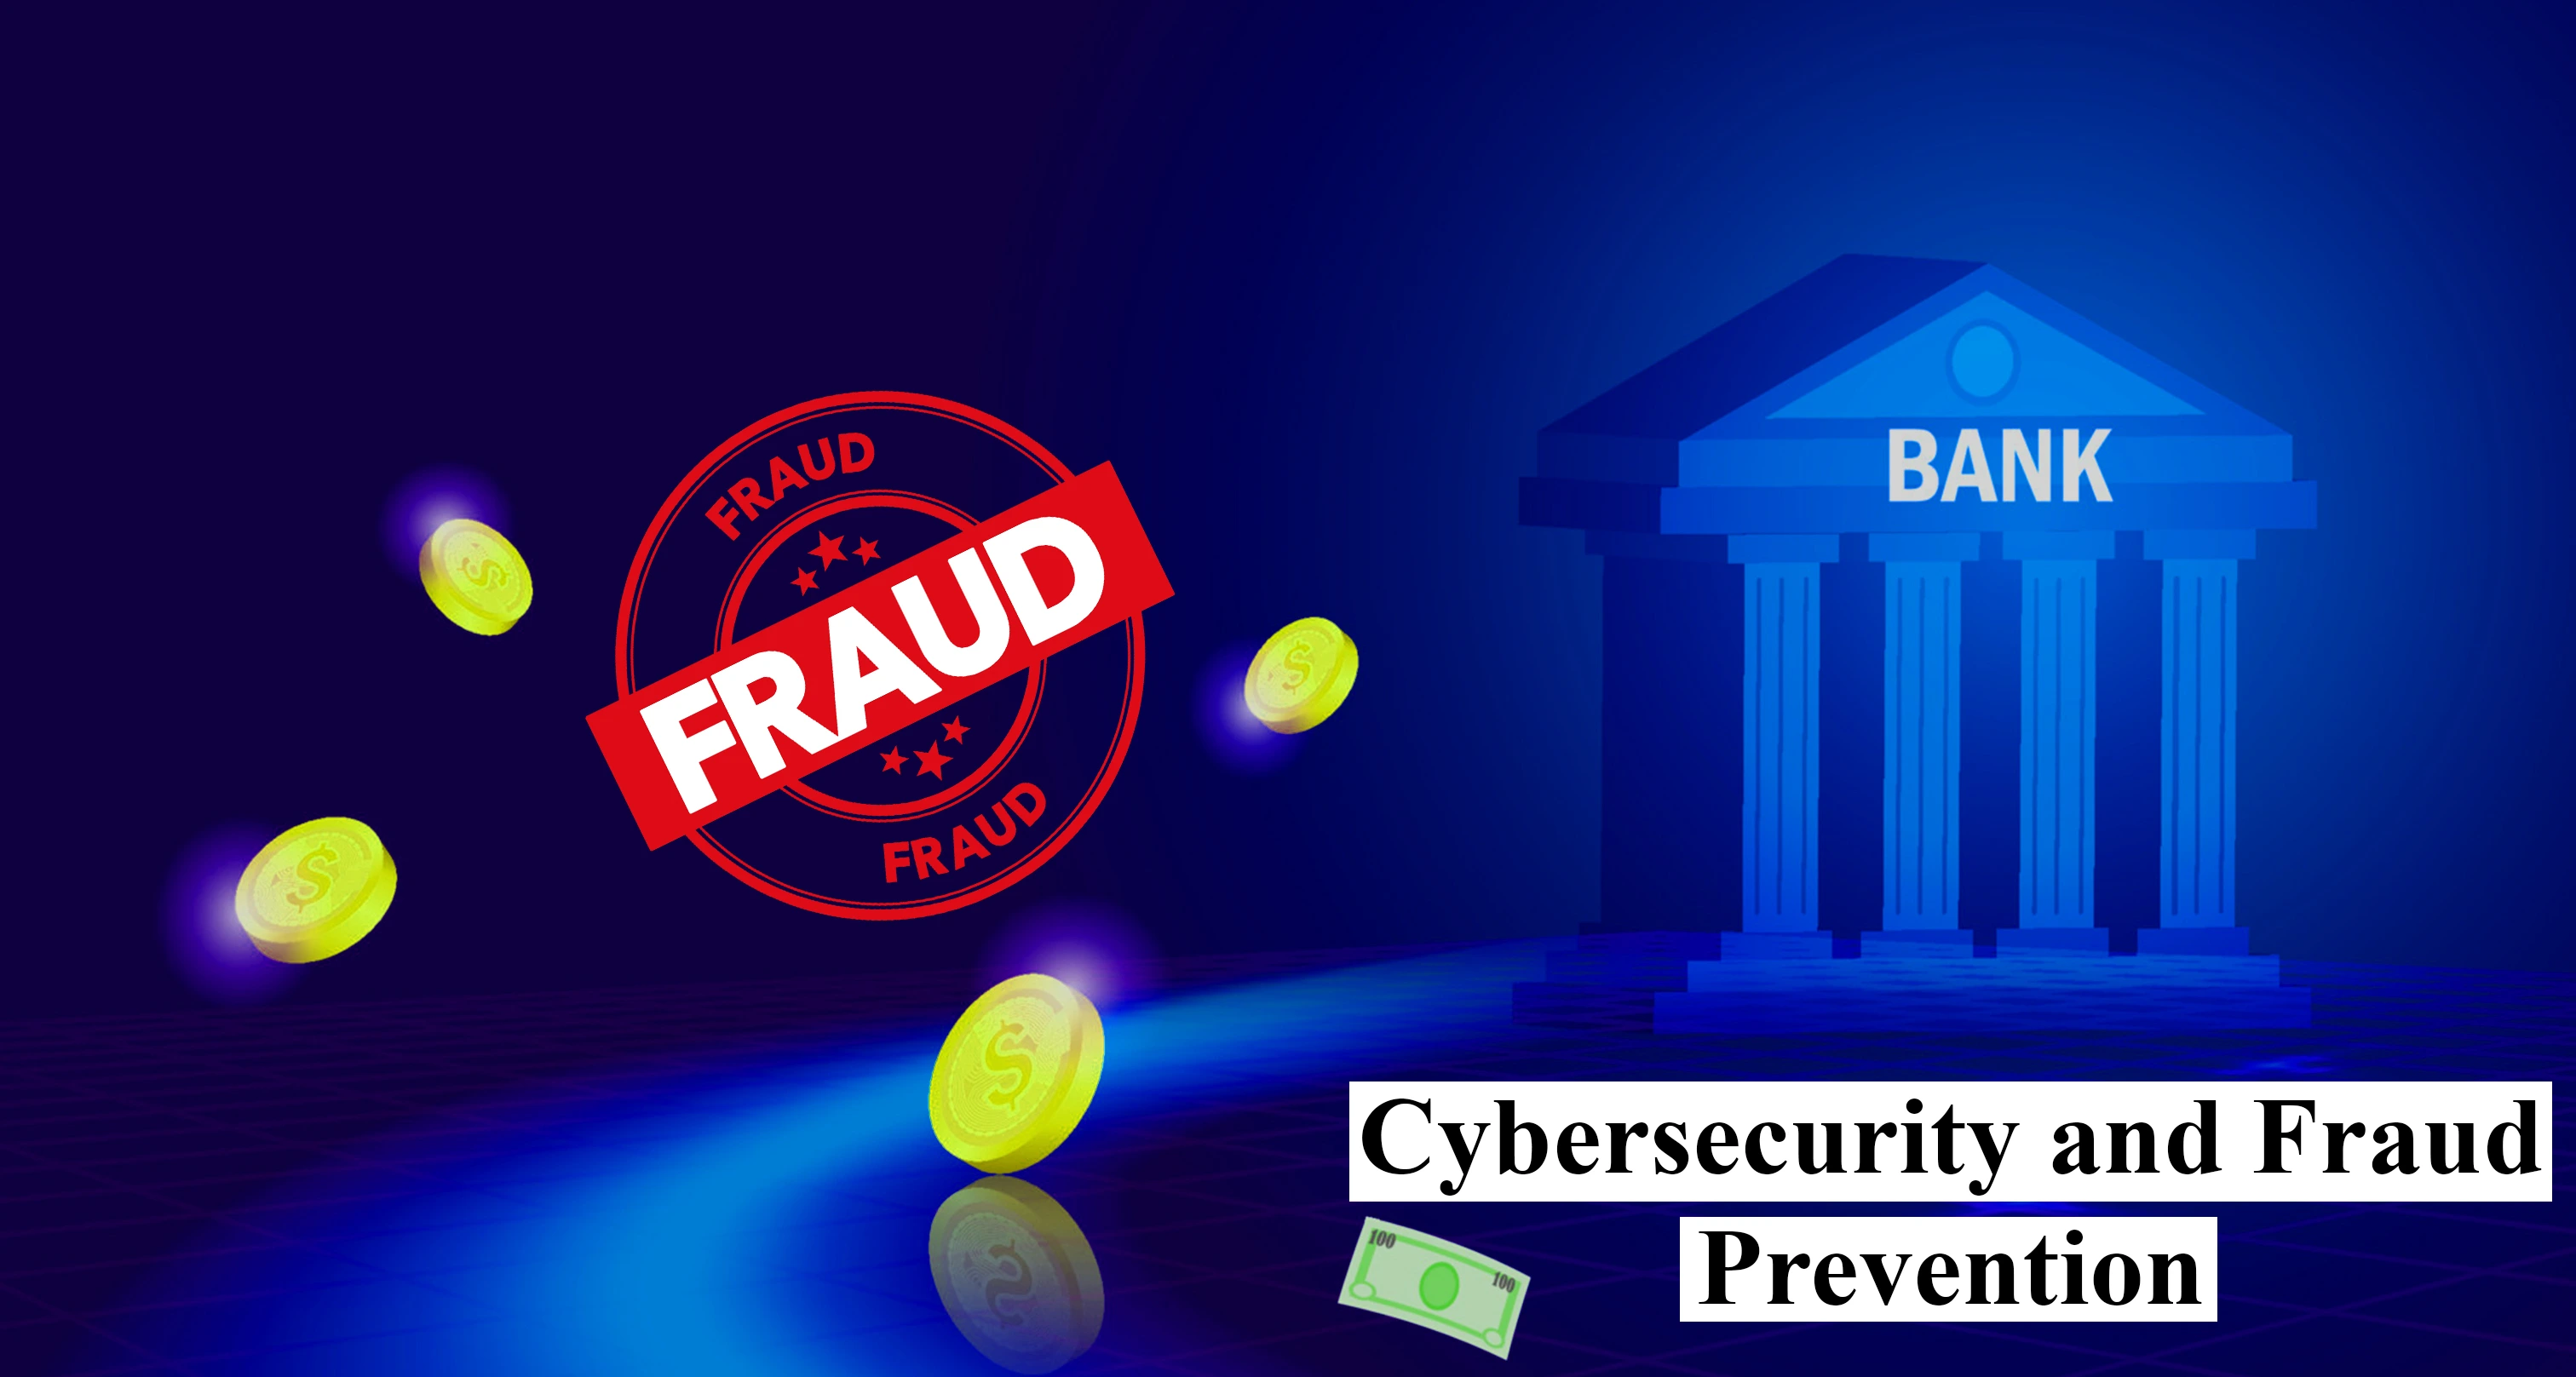  Cybersecurity and Fraud Prevention